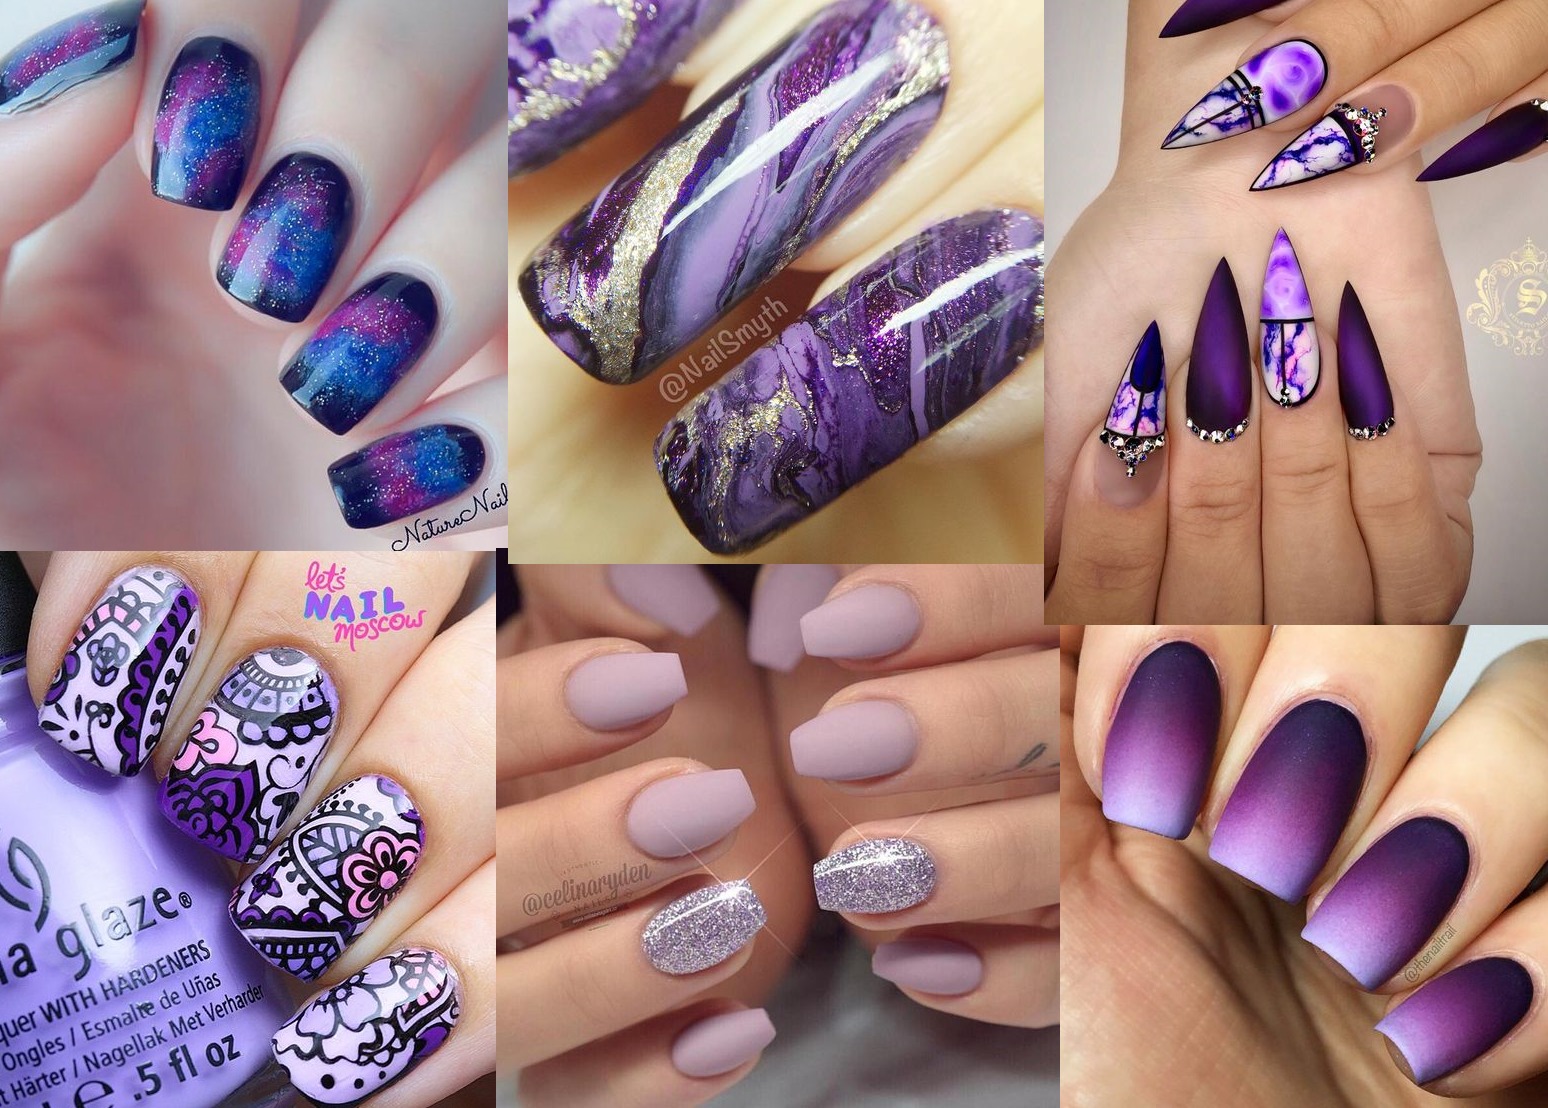 5. Studded Black and Purple Nail Design - wide 4